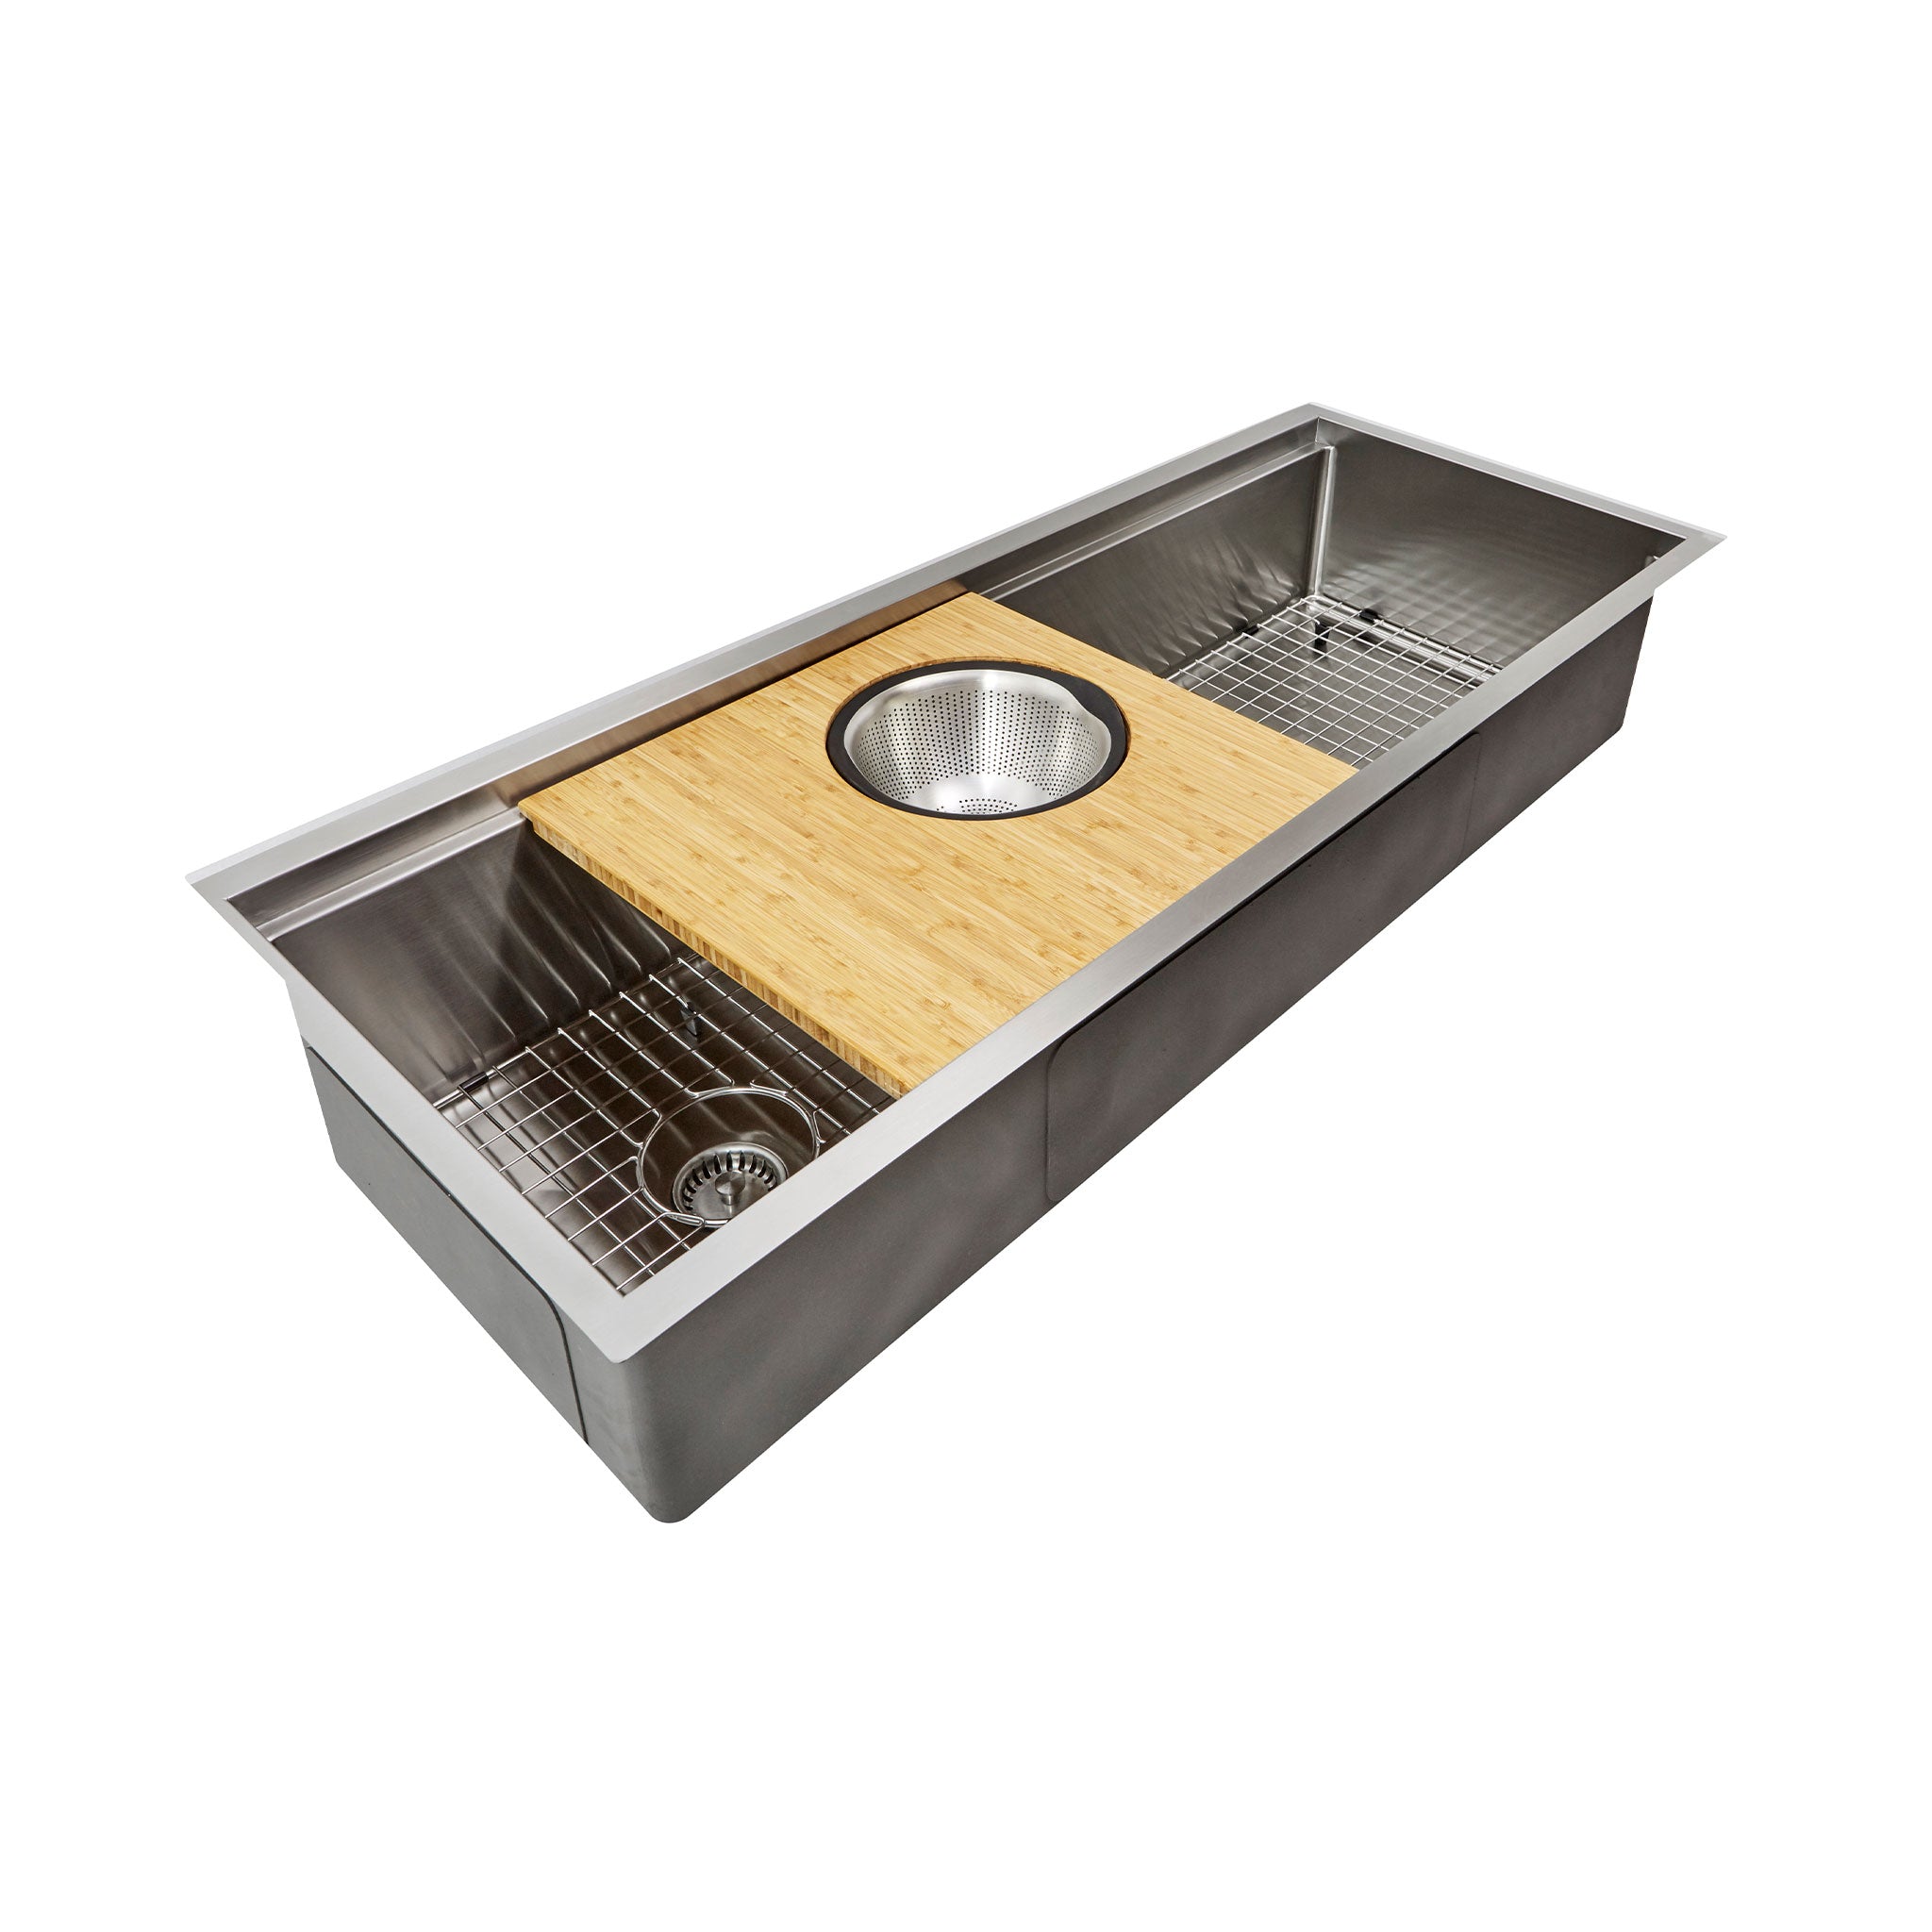 Bamboo attachment mixing board with colander bowl in a 50" workstation kitchen sink